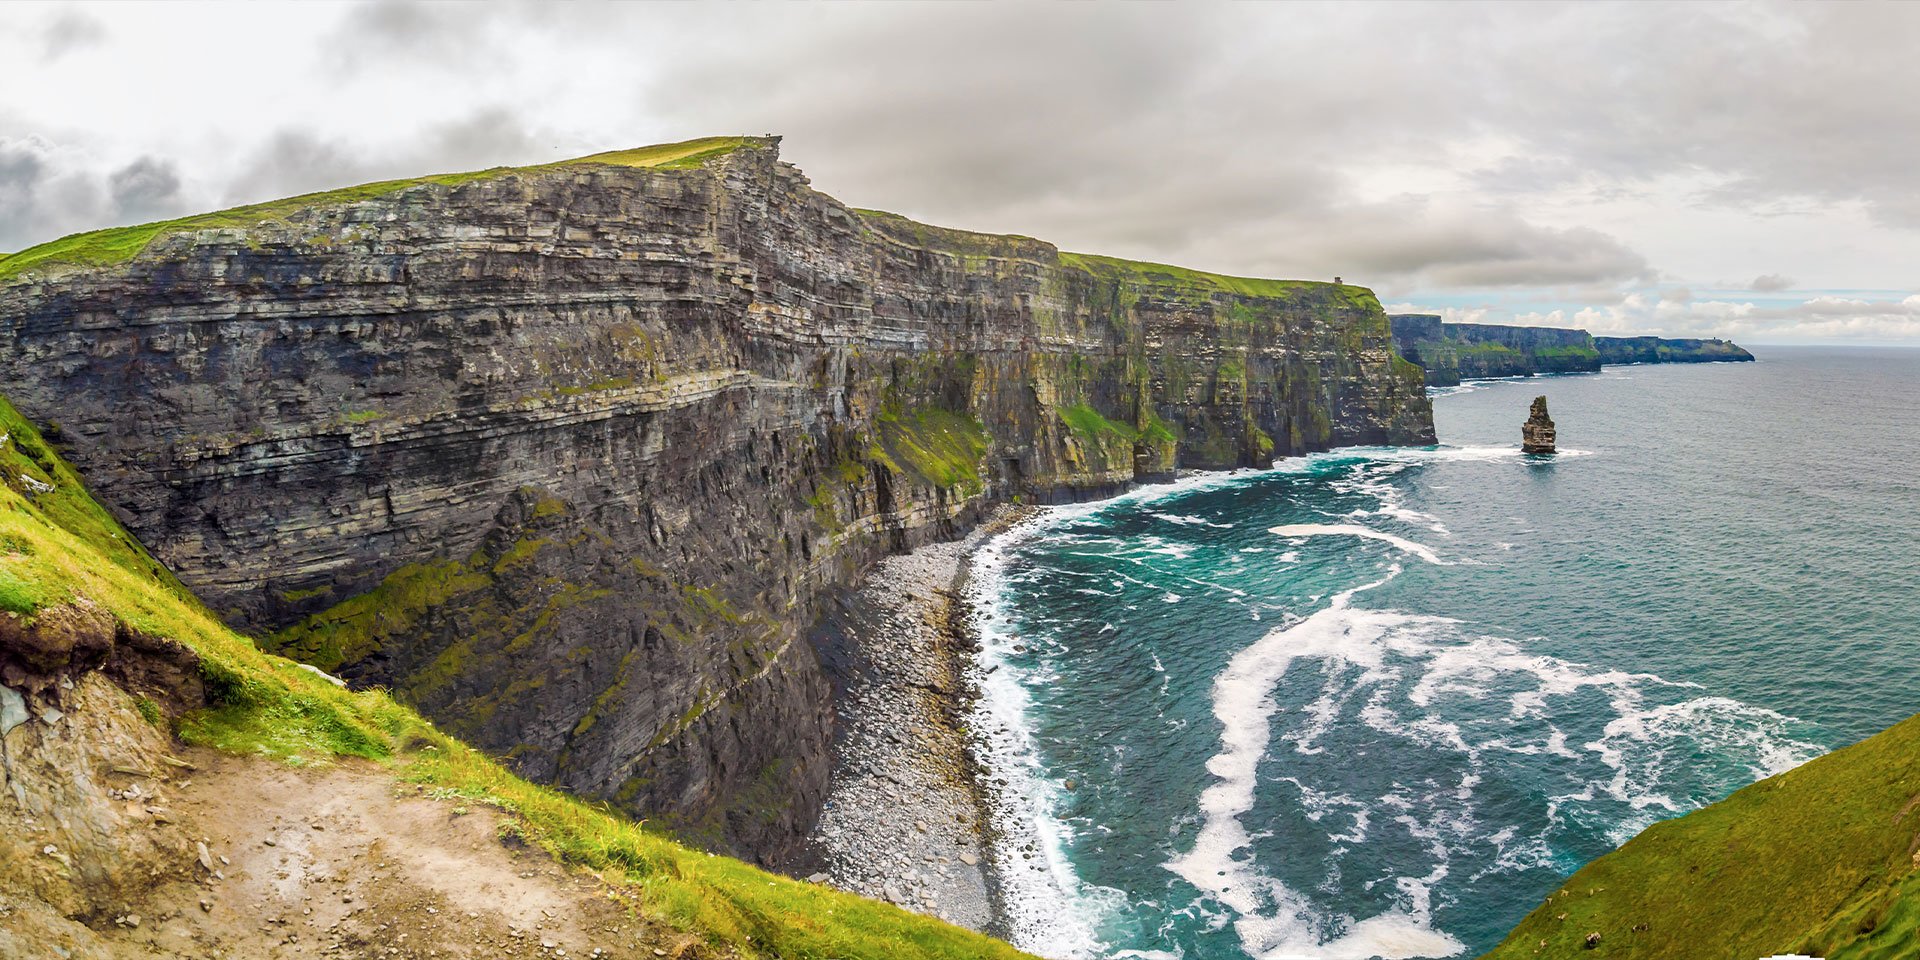 The emerald isle awaits for your next vacation.